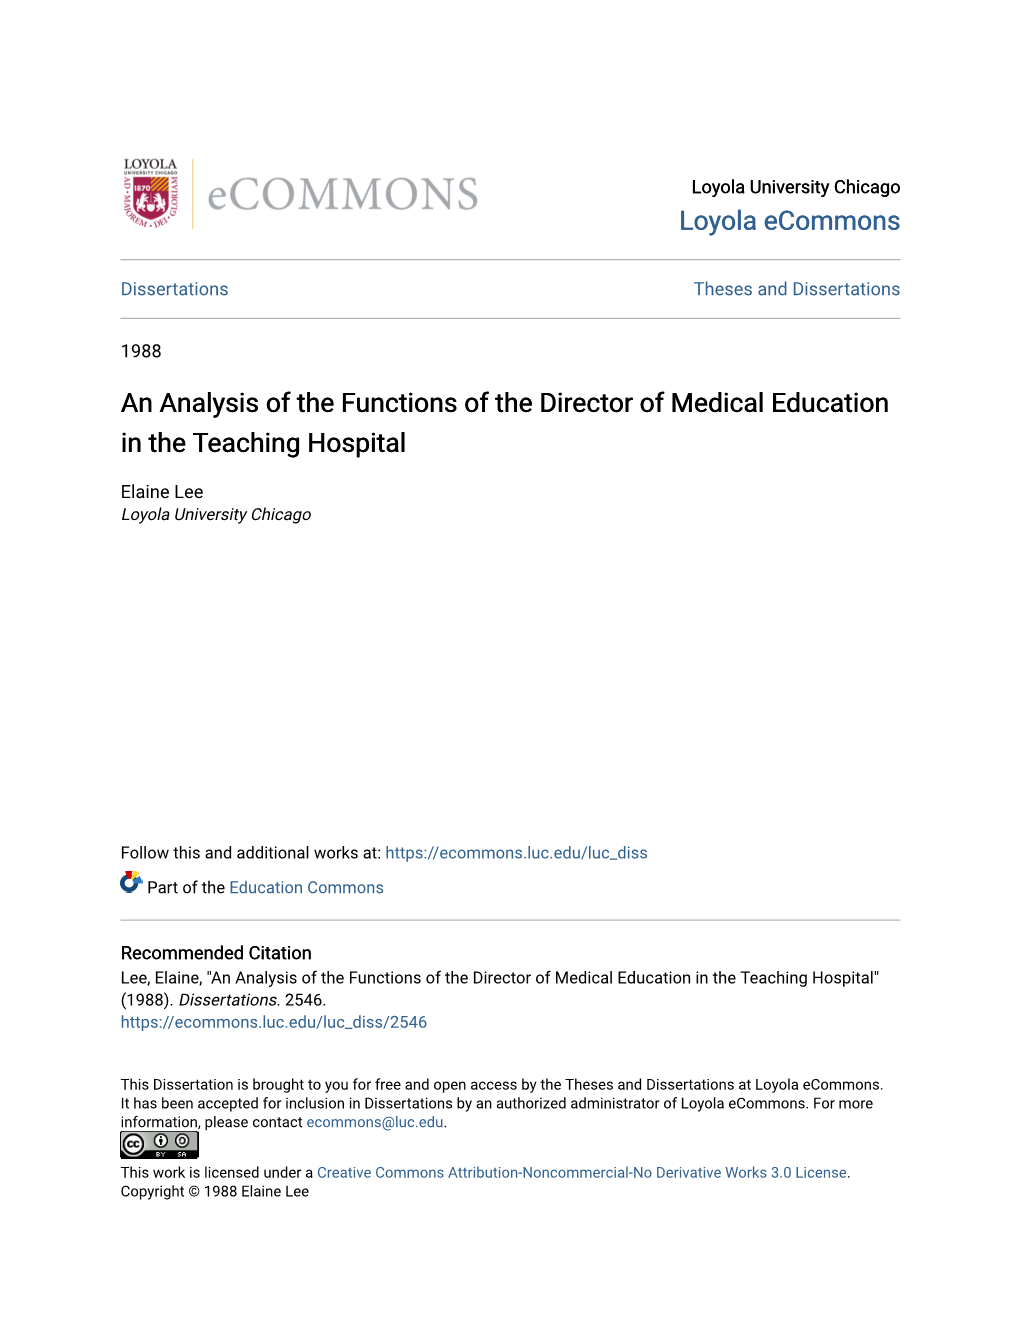 An Analysis of the Functions of the Director of Medical Education in the Teaching Hospital